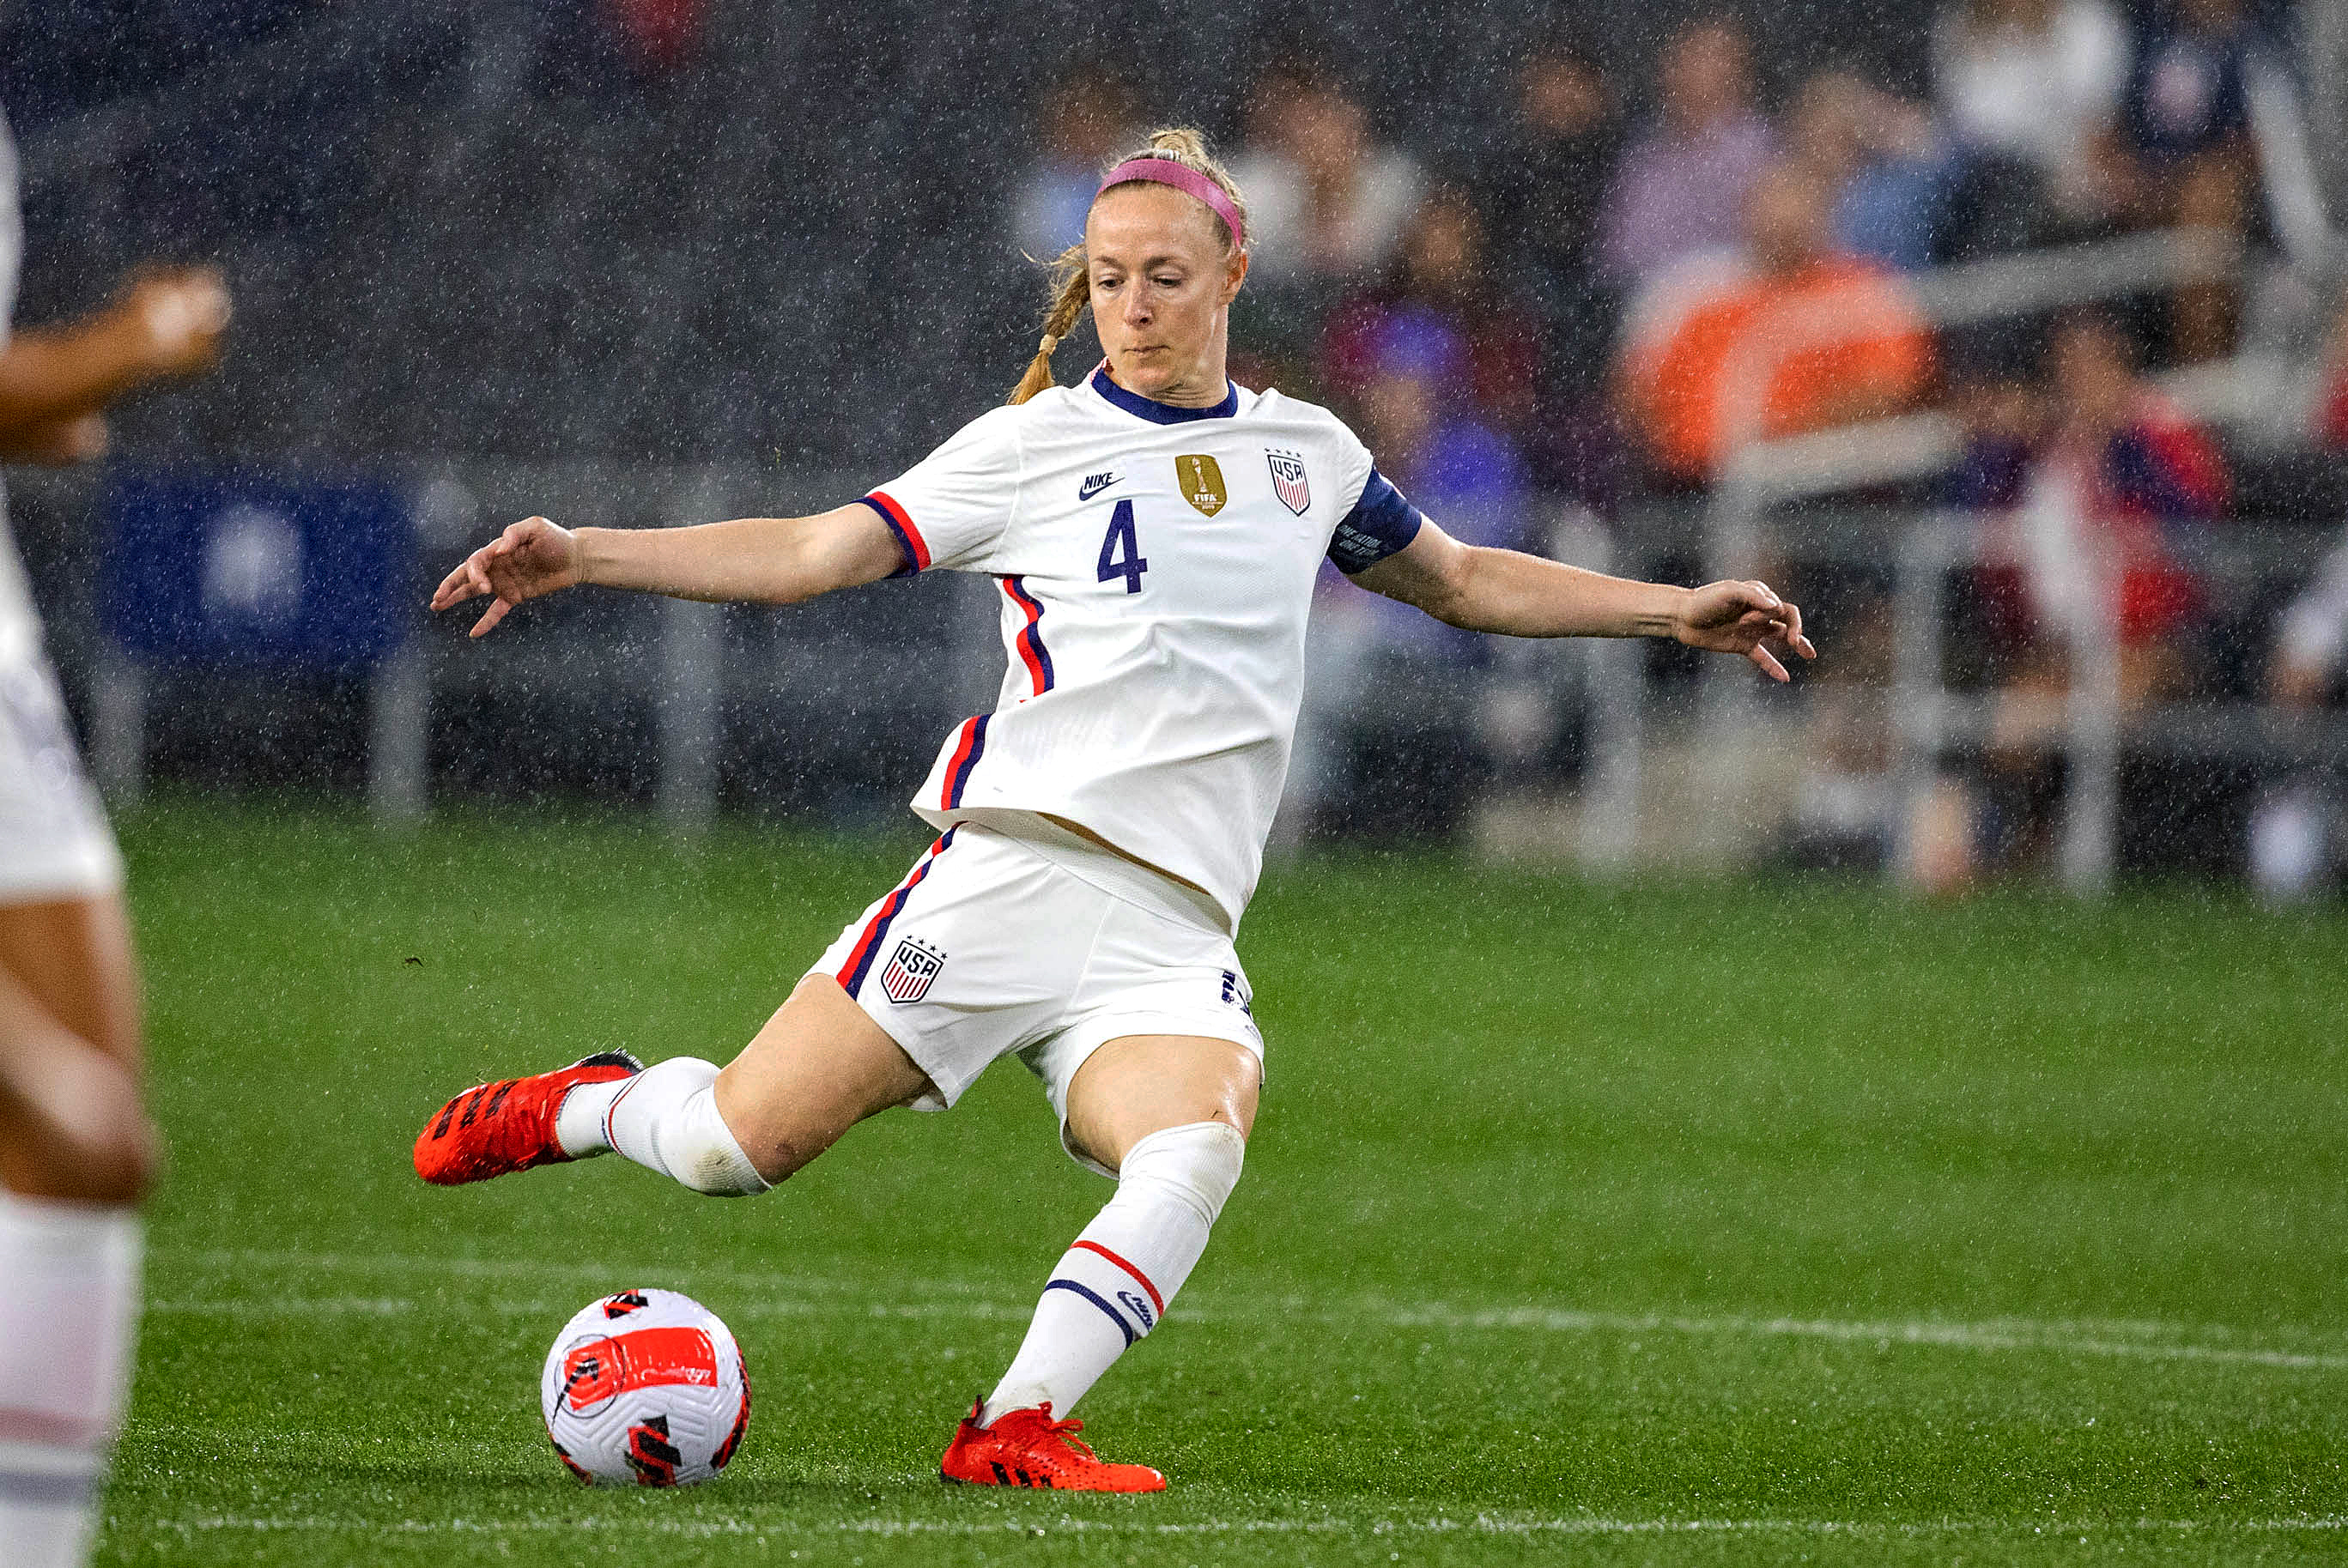 U.S. captain Sauerbrunn to miss World Cup after injury